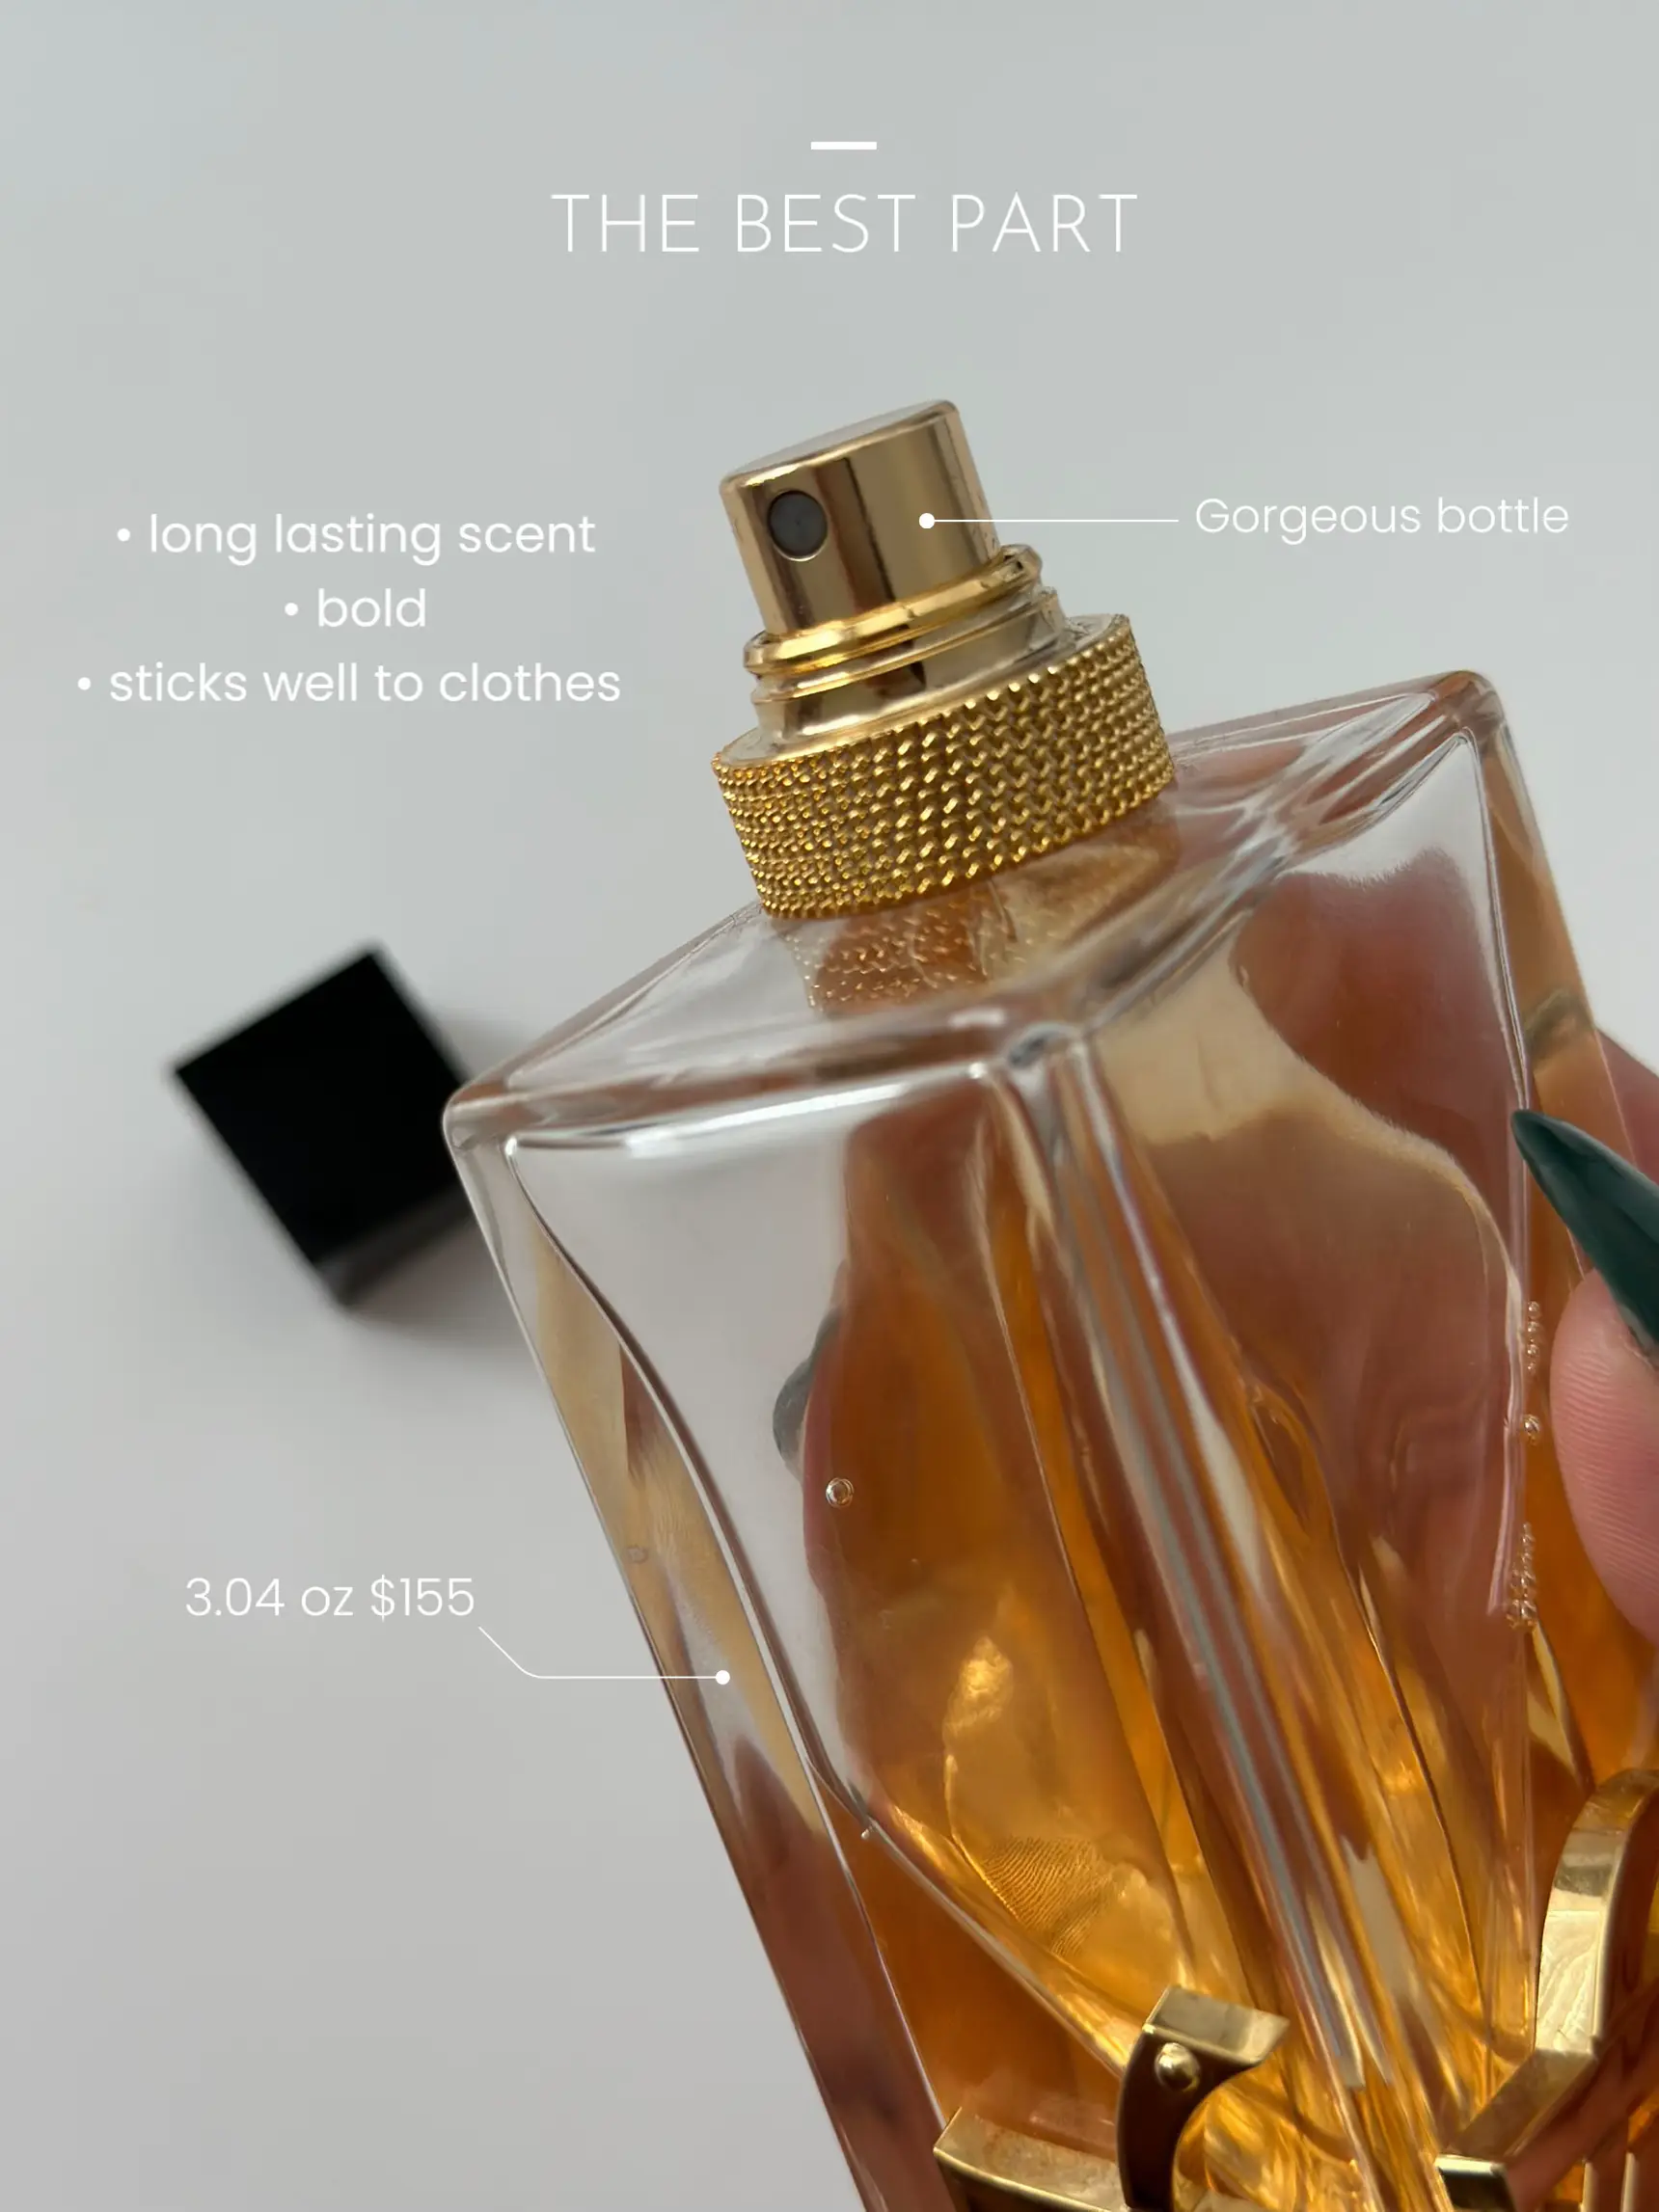 New Perfume for Women Libre Intense Yves Saint Laurent Oriental Fougere  Scent is Sold in a Cosmetics and Perfumery Store in the 12 Editorial Stock  Image - Image of laurent, feminine: 209334604